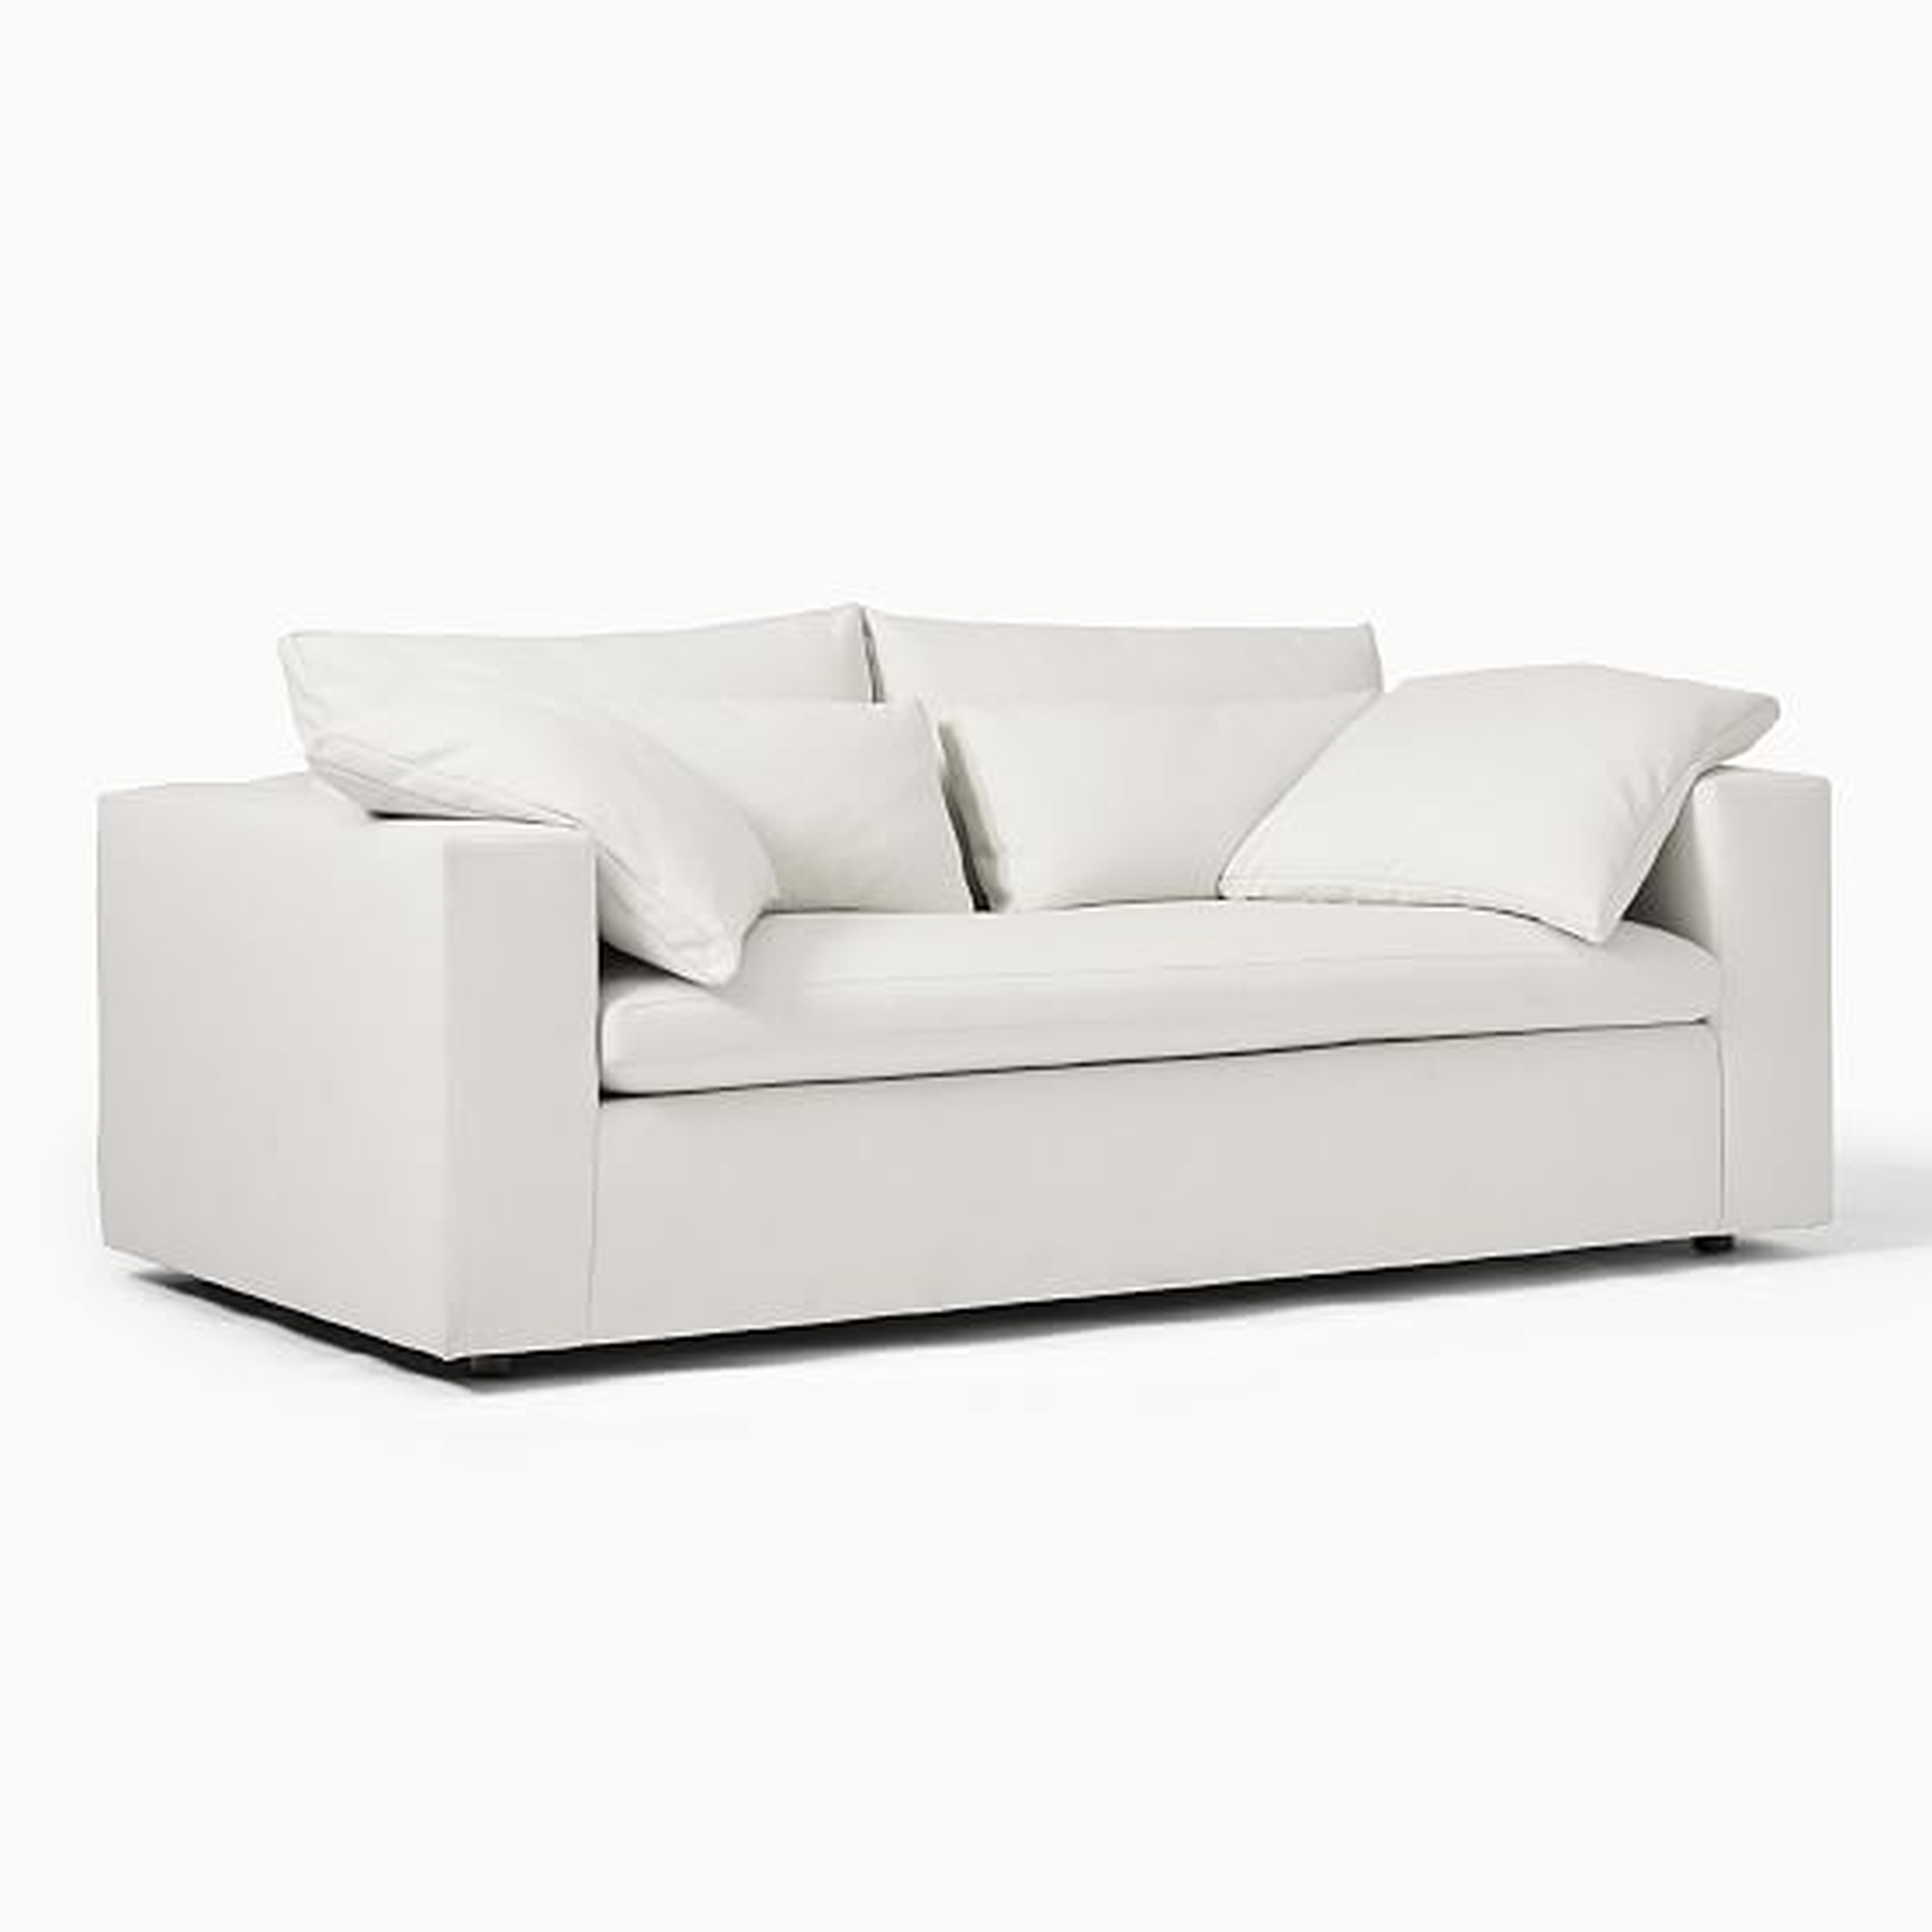 Harmony Modular Sleeper Sofa, Down, Eco Weave, Oyster, Concealed Supports - West Elm